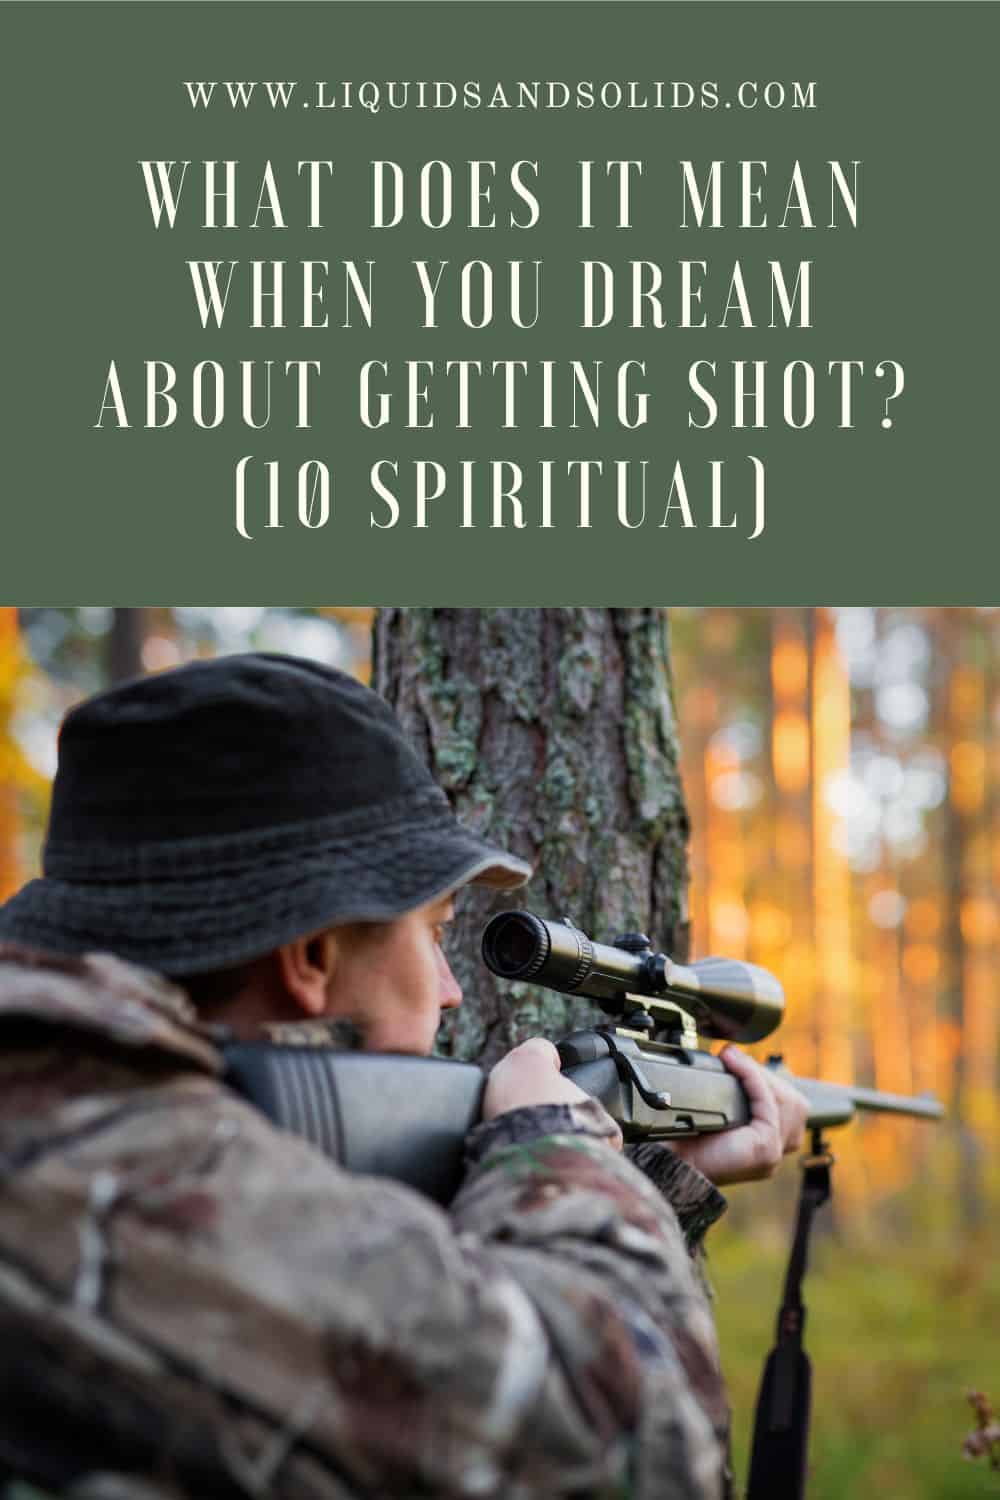 What Does it Mean When You Dream About Getting Shot?